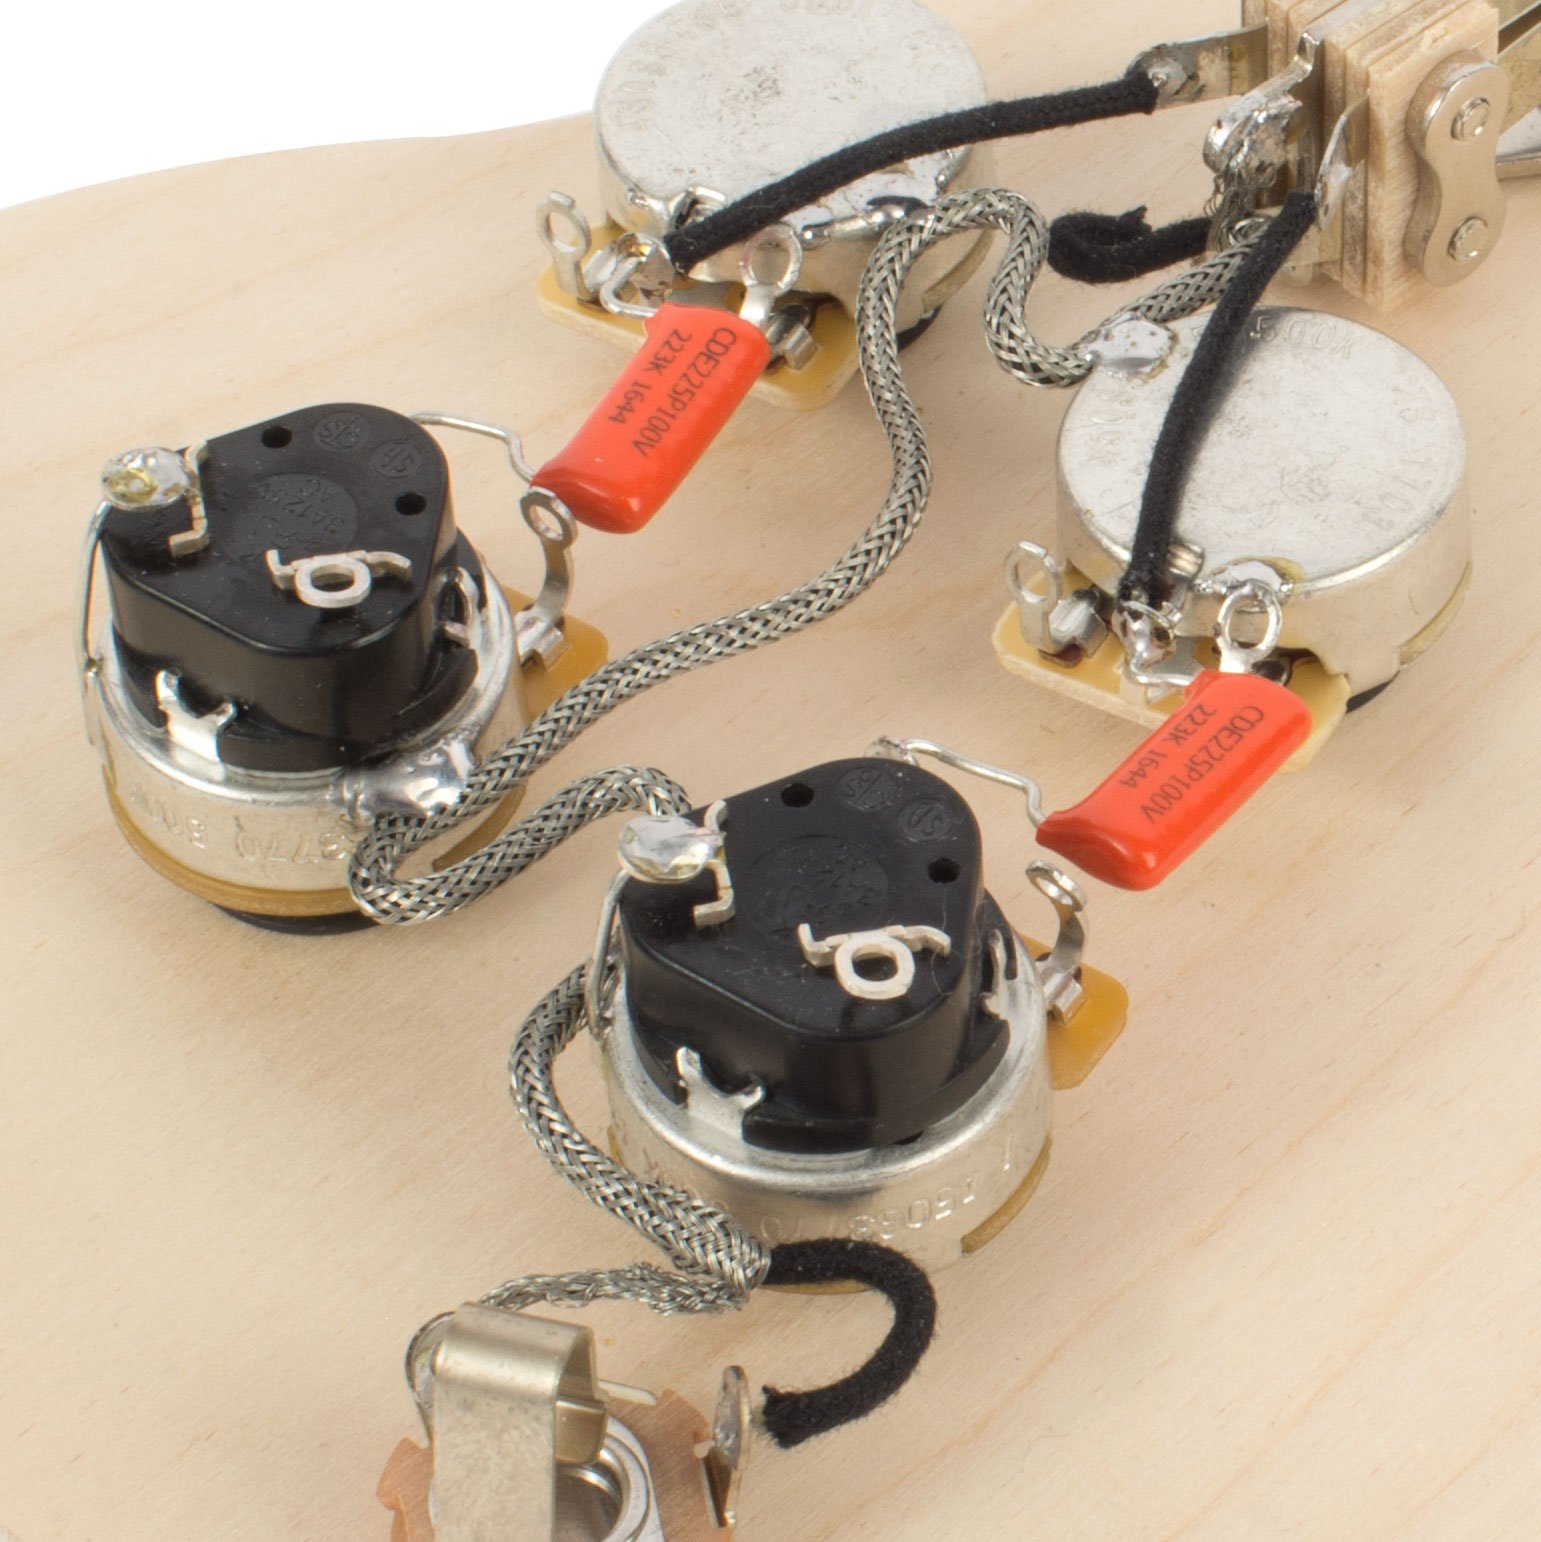 Golden Age Pre-wired Harness for Gibson&reg; SG&reg; with Push-pull Pots